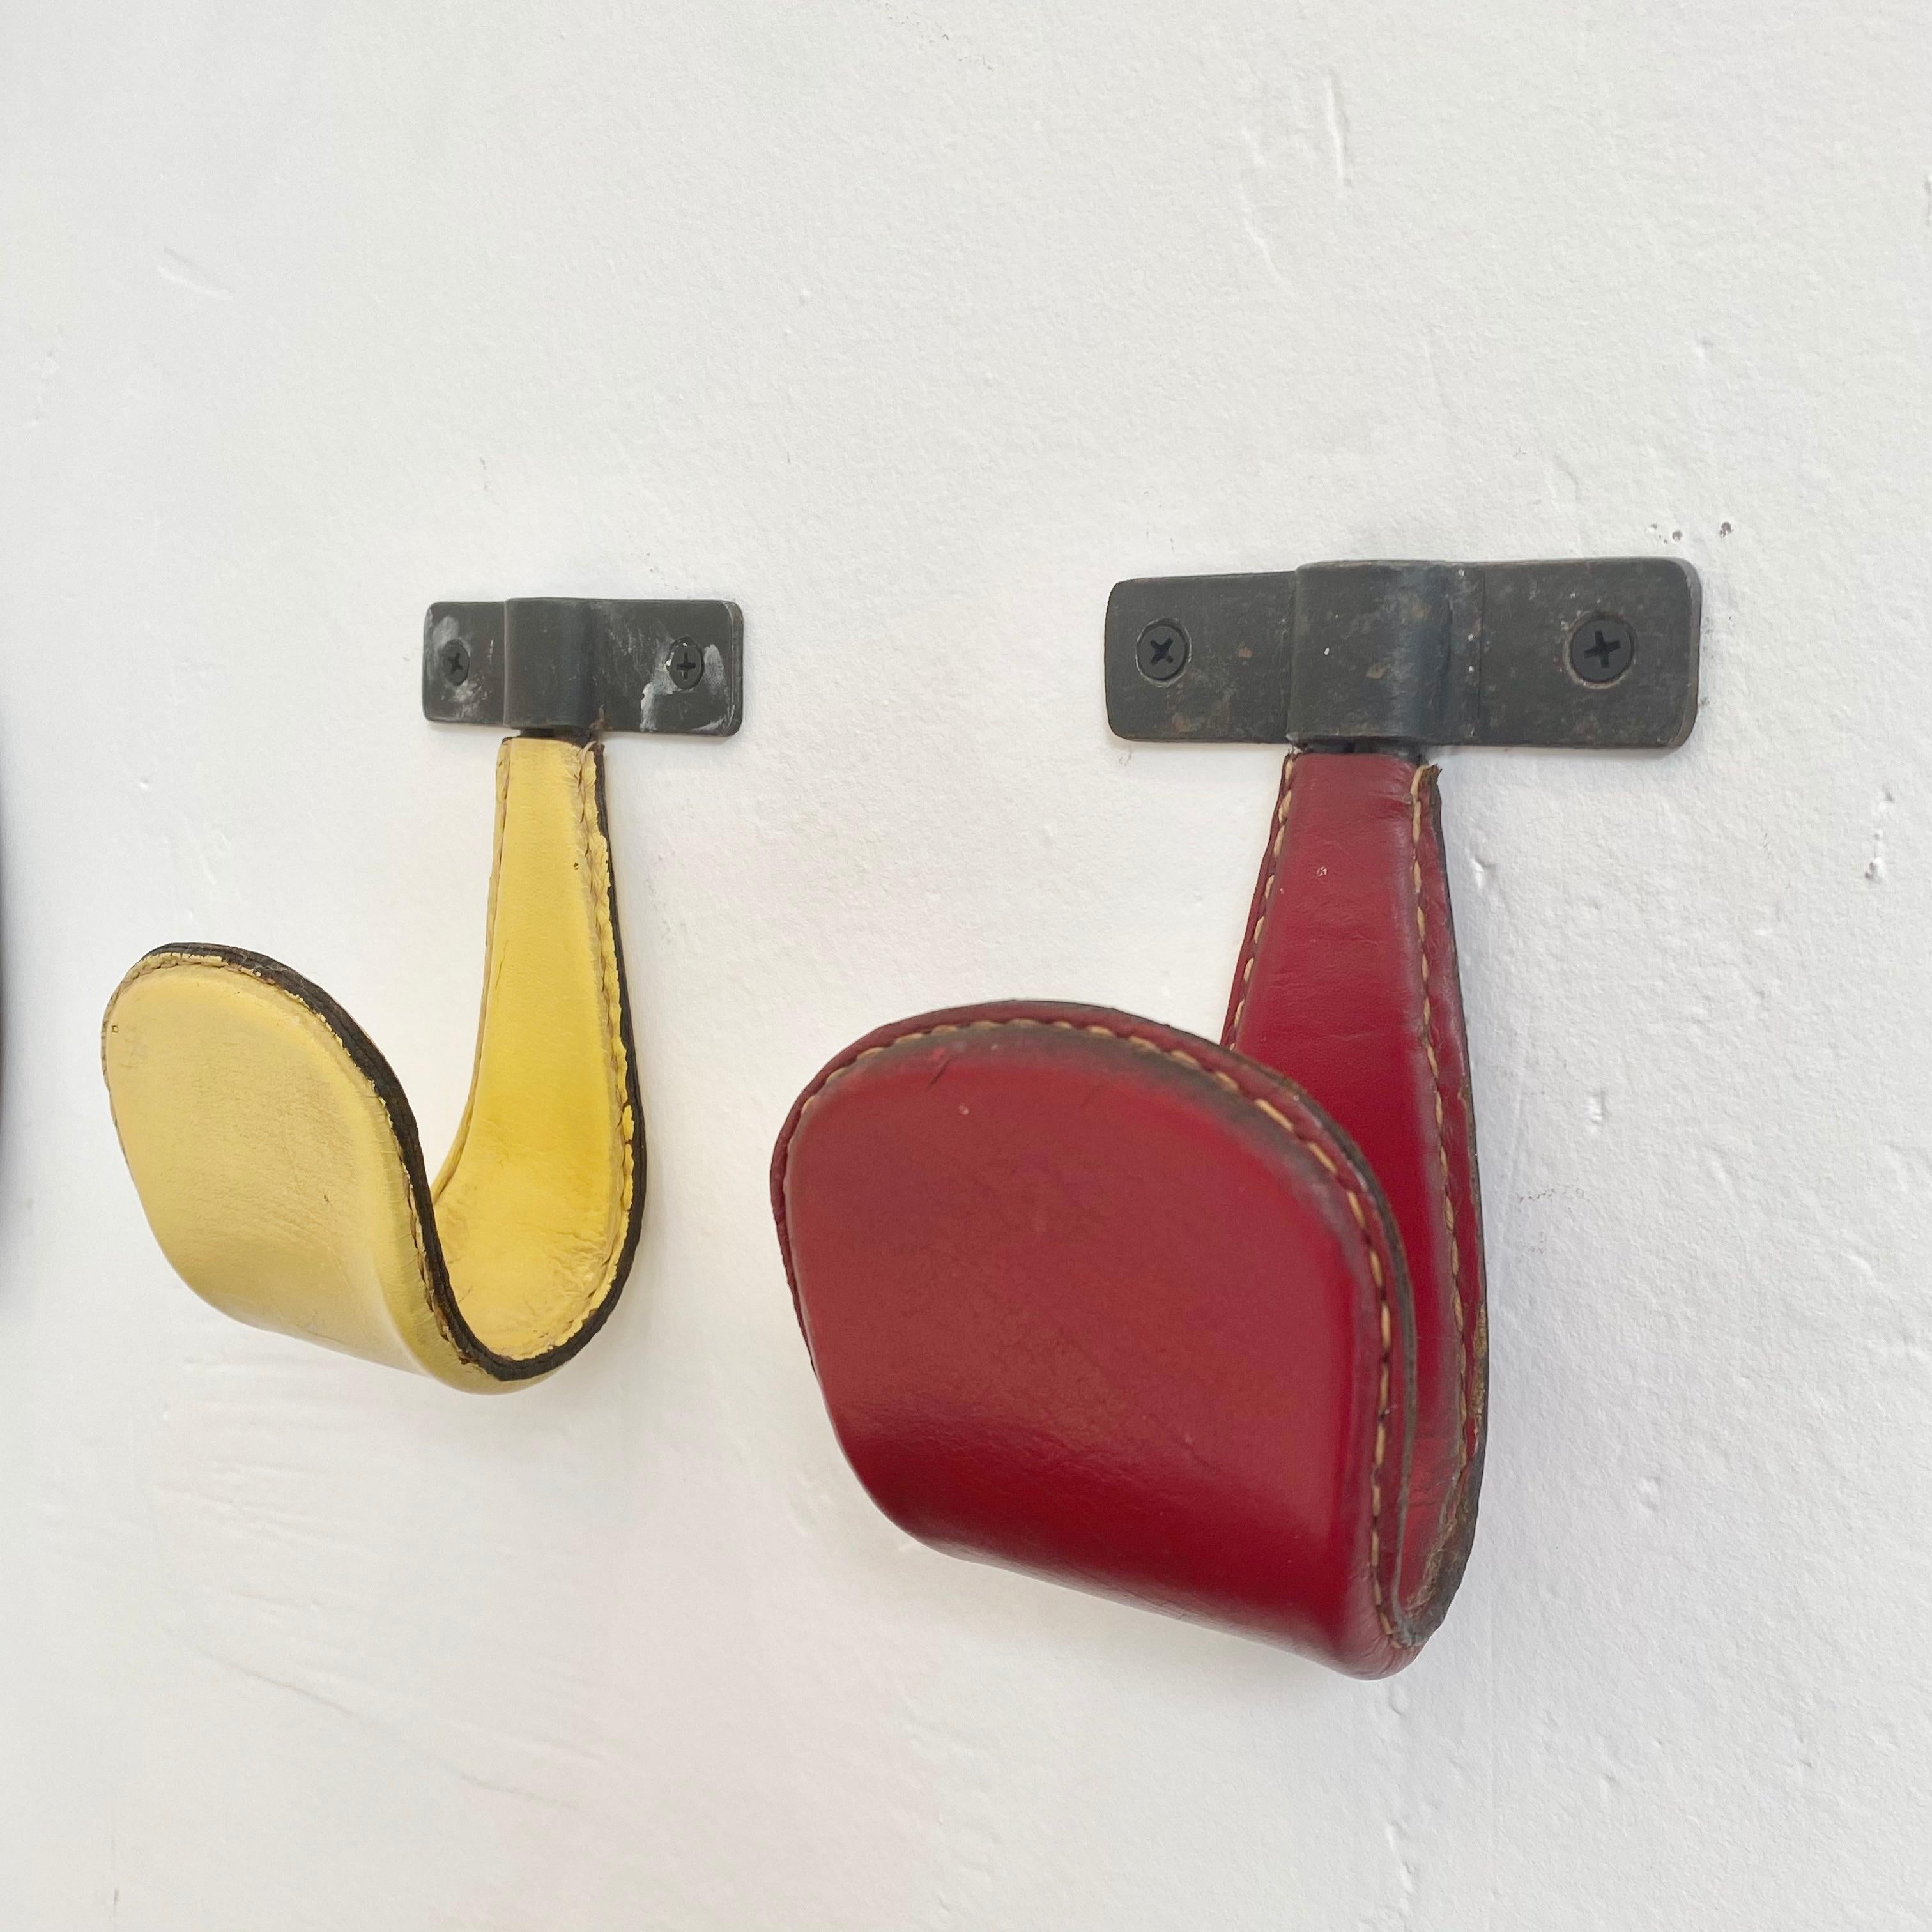 Vintage leather and iron tongue hooks by French designer Jacques Adnet. One red hook and one yellow hook. Good vintage condition. Priced individually.